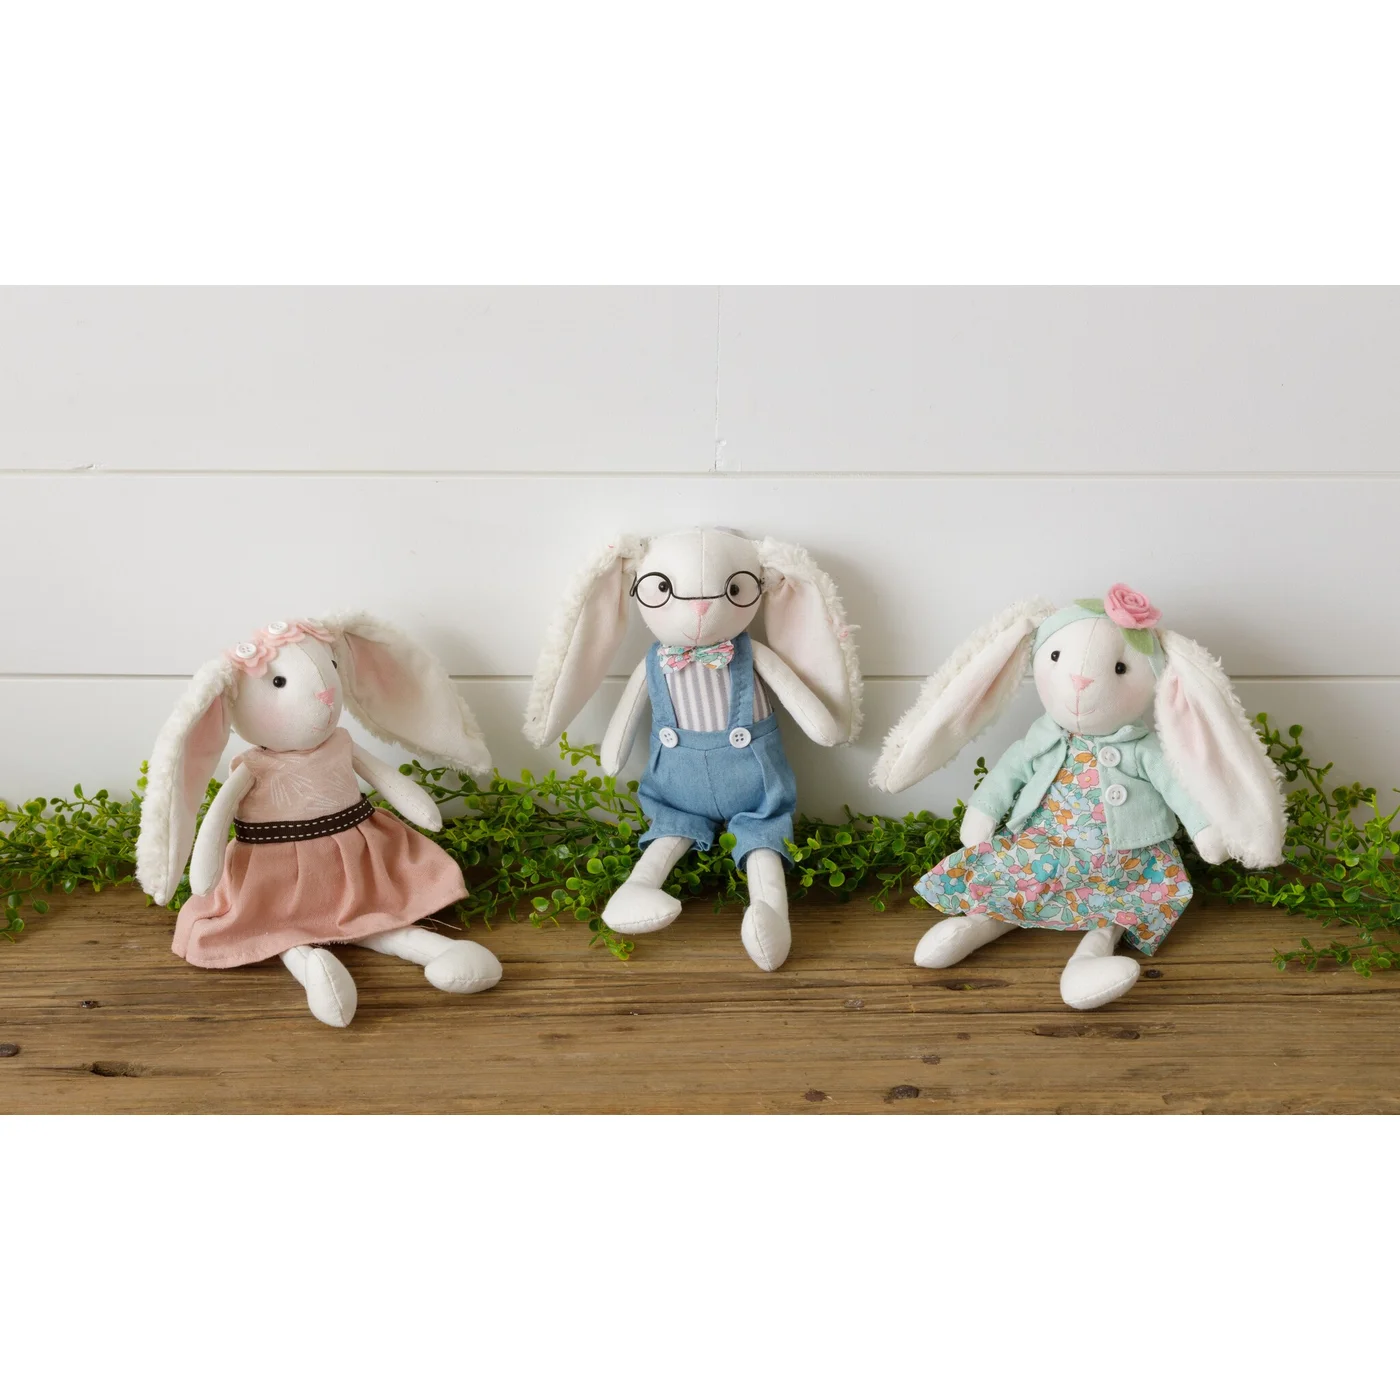 Set of 3 Lop Eared 12" Fabric Rabbits in Spring Outfits